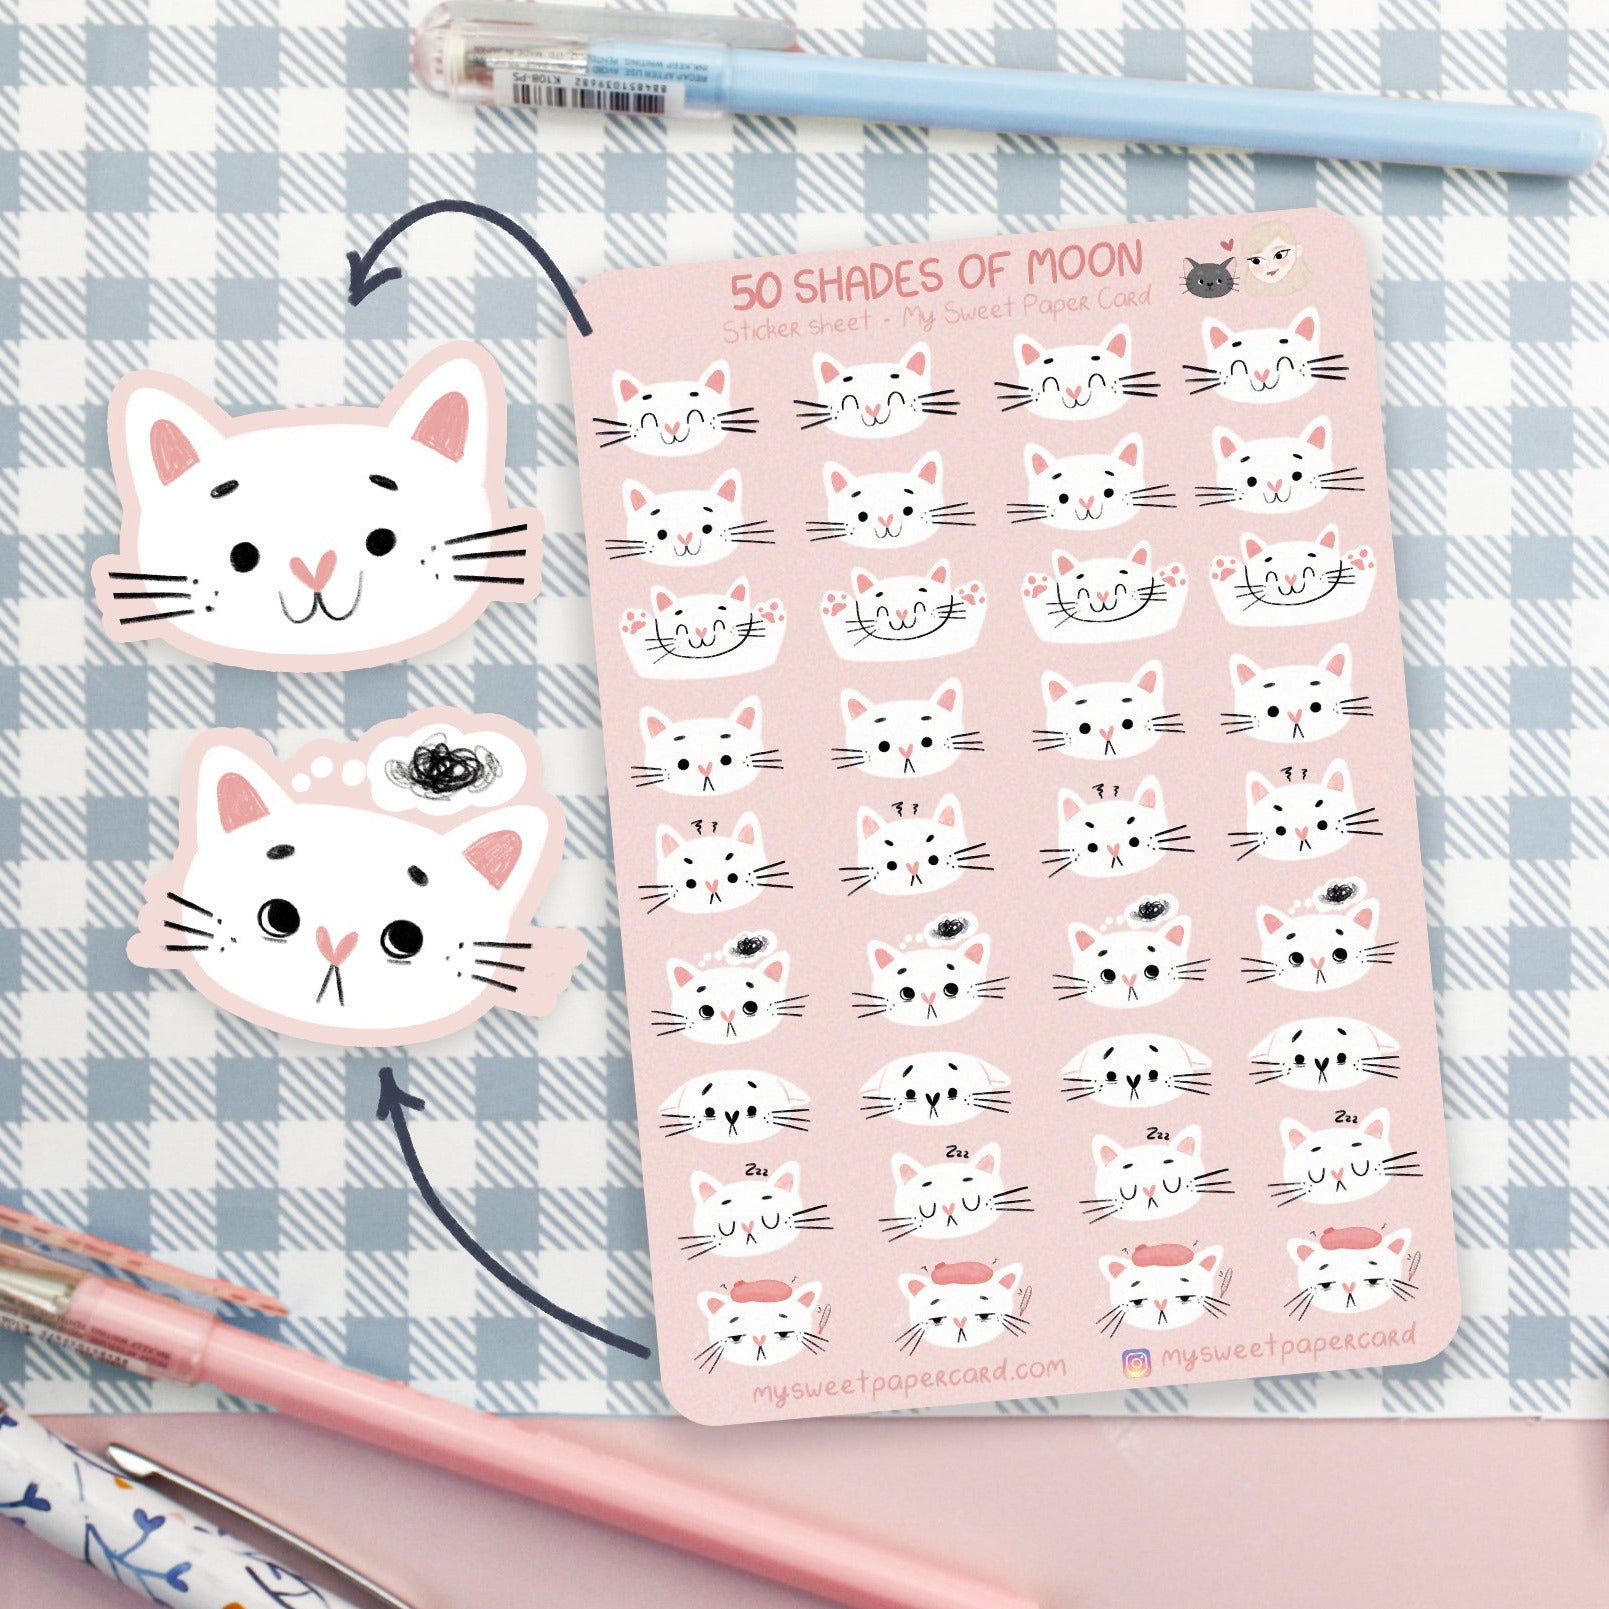 Midnight mood stickers - cat planner stickers - bullet journal